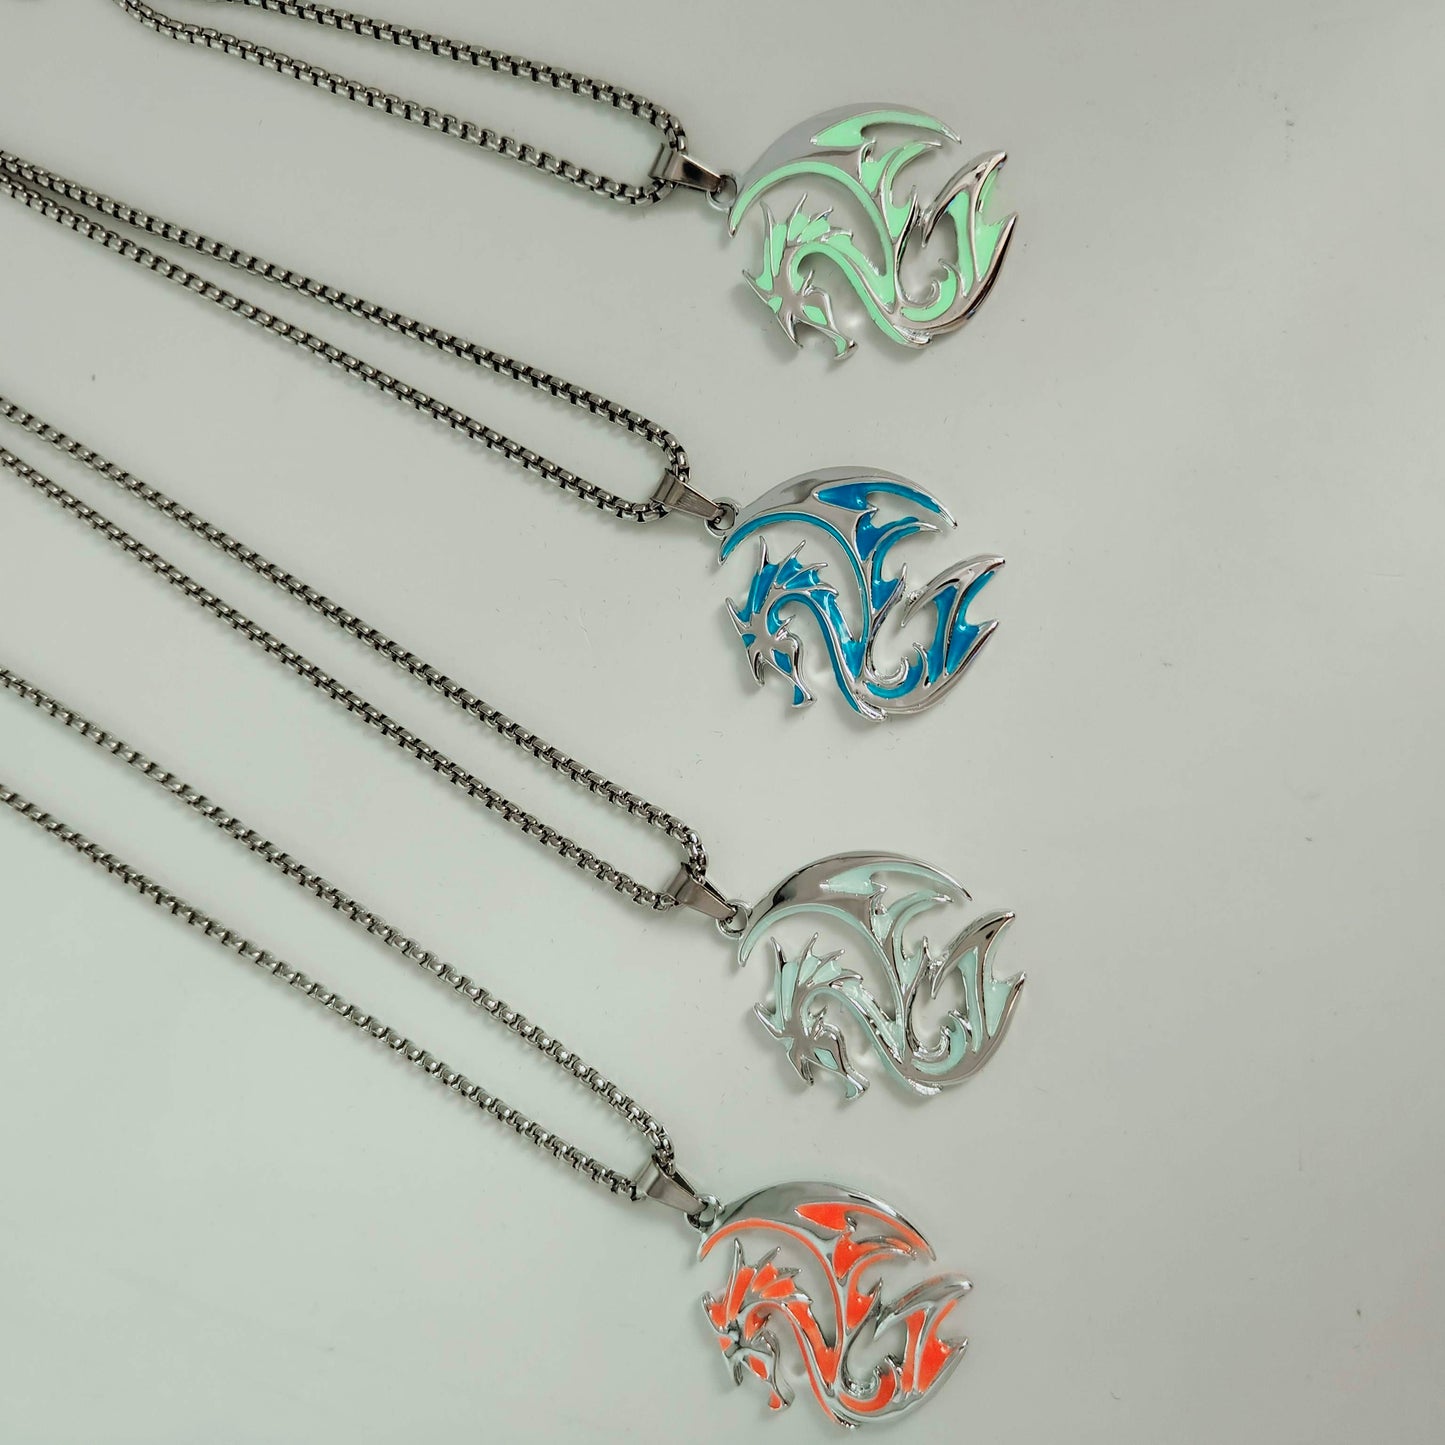 Glow in the Dark Tribal Dragon Pendant and necklace